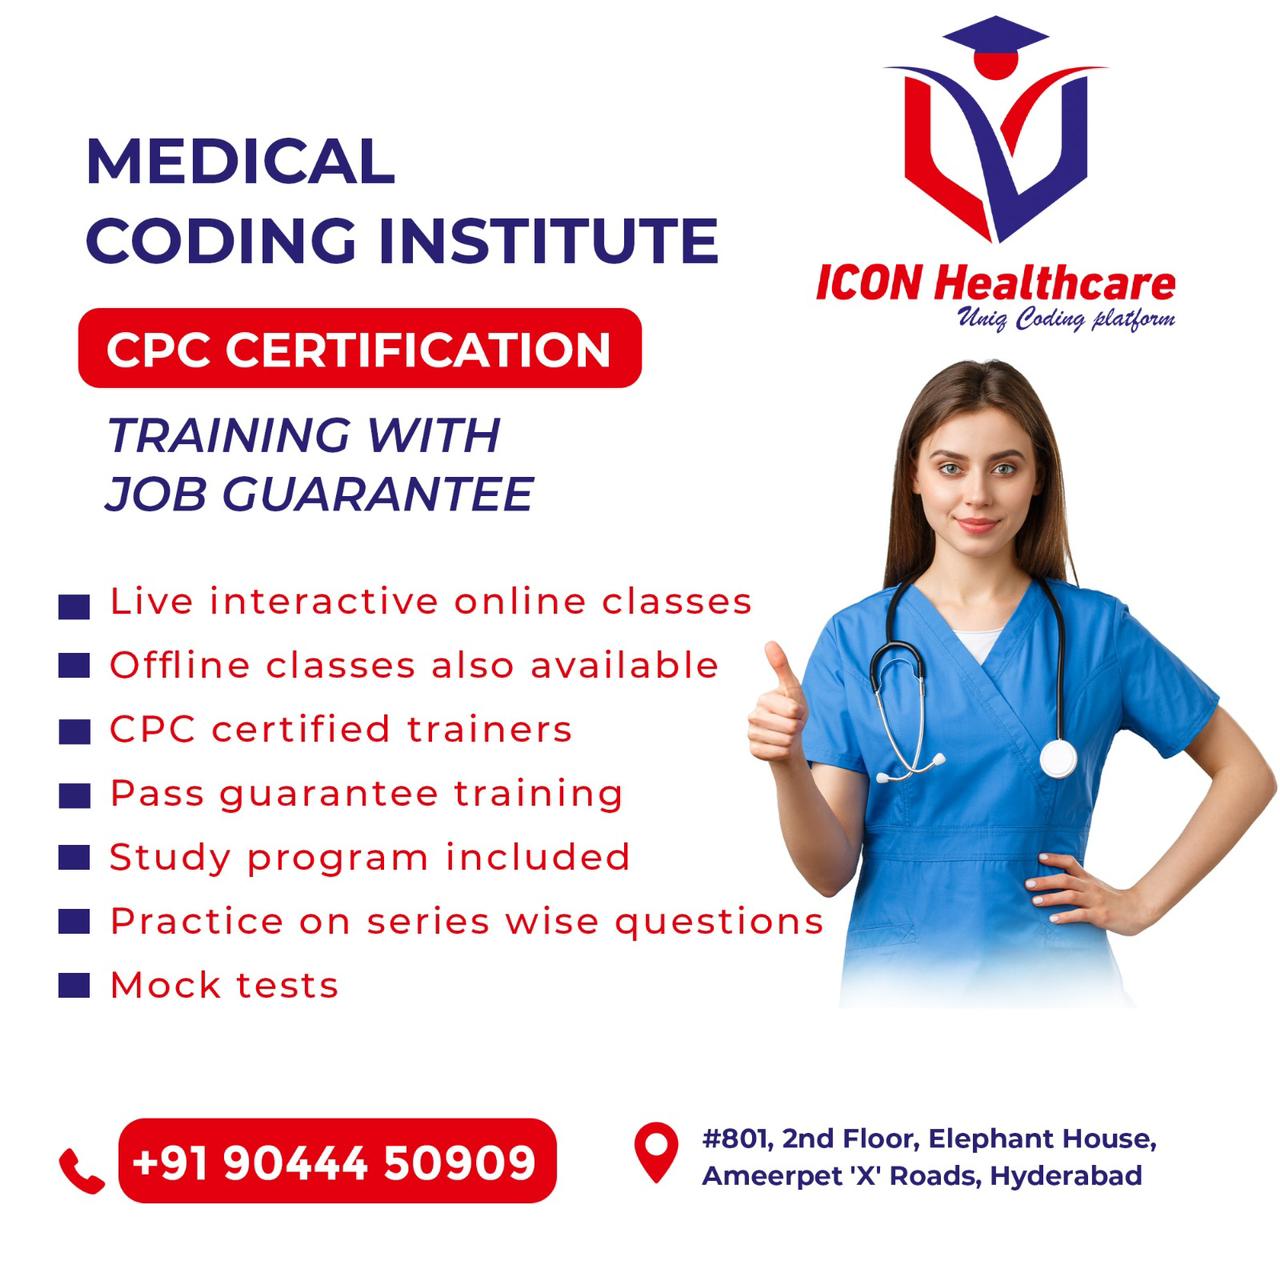 MEDICAL CODING COURSE ONLINE FREE WITH CERTIFICATE - Andhra Pradesh - Hyderabad ID1517930